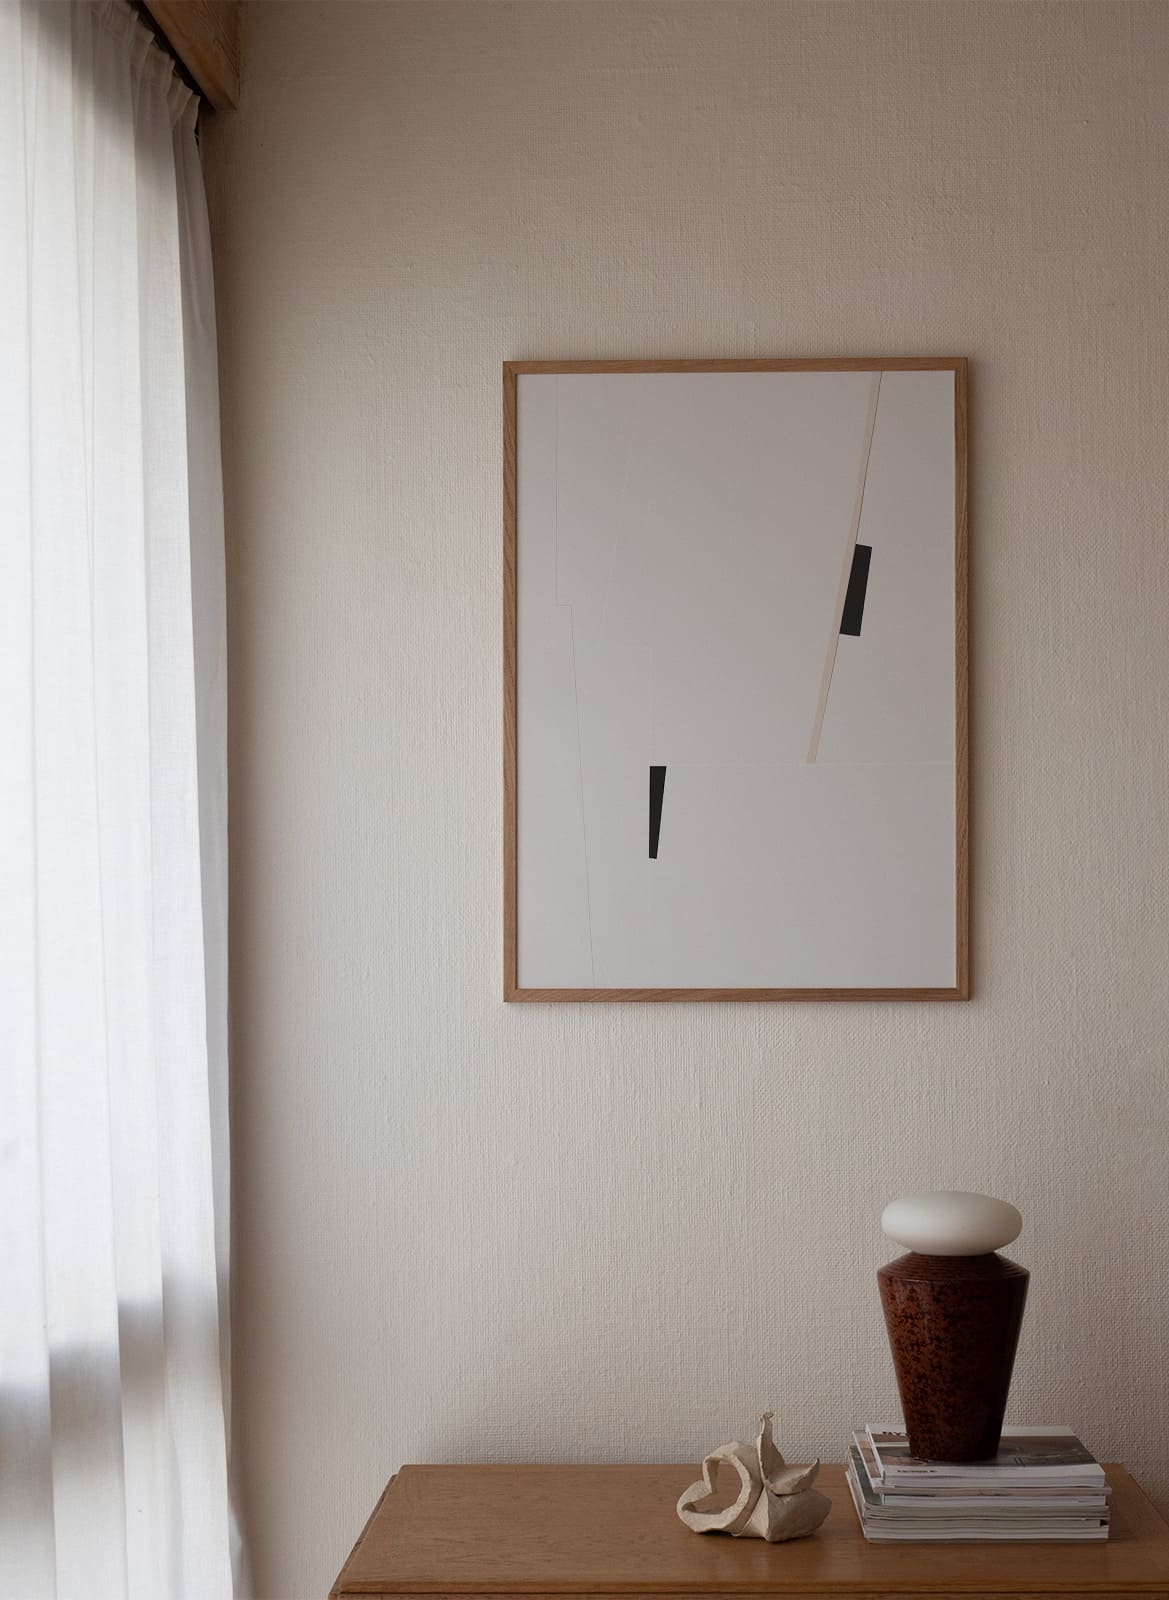 Framed minimalistic poster hanging above a table by atelier cph